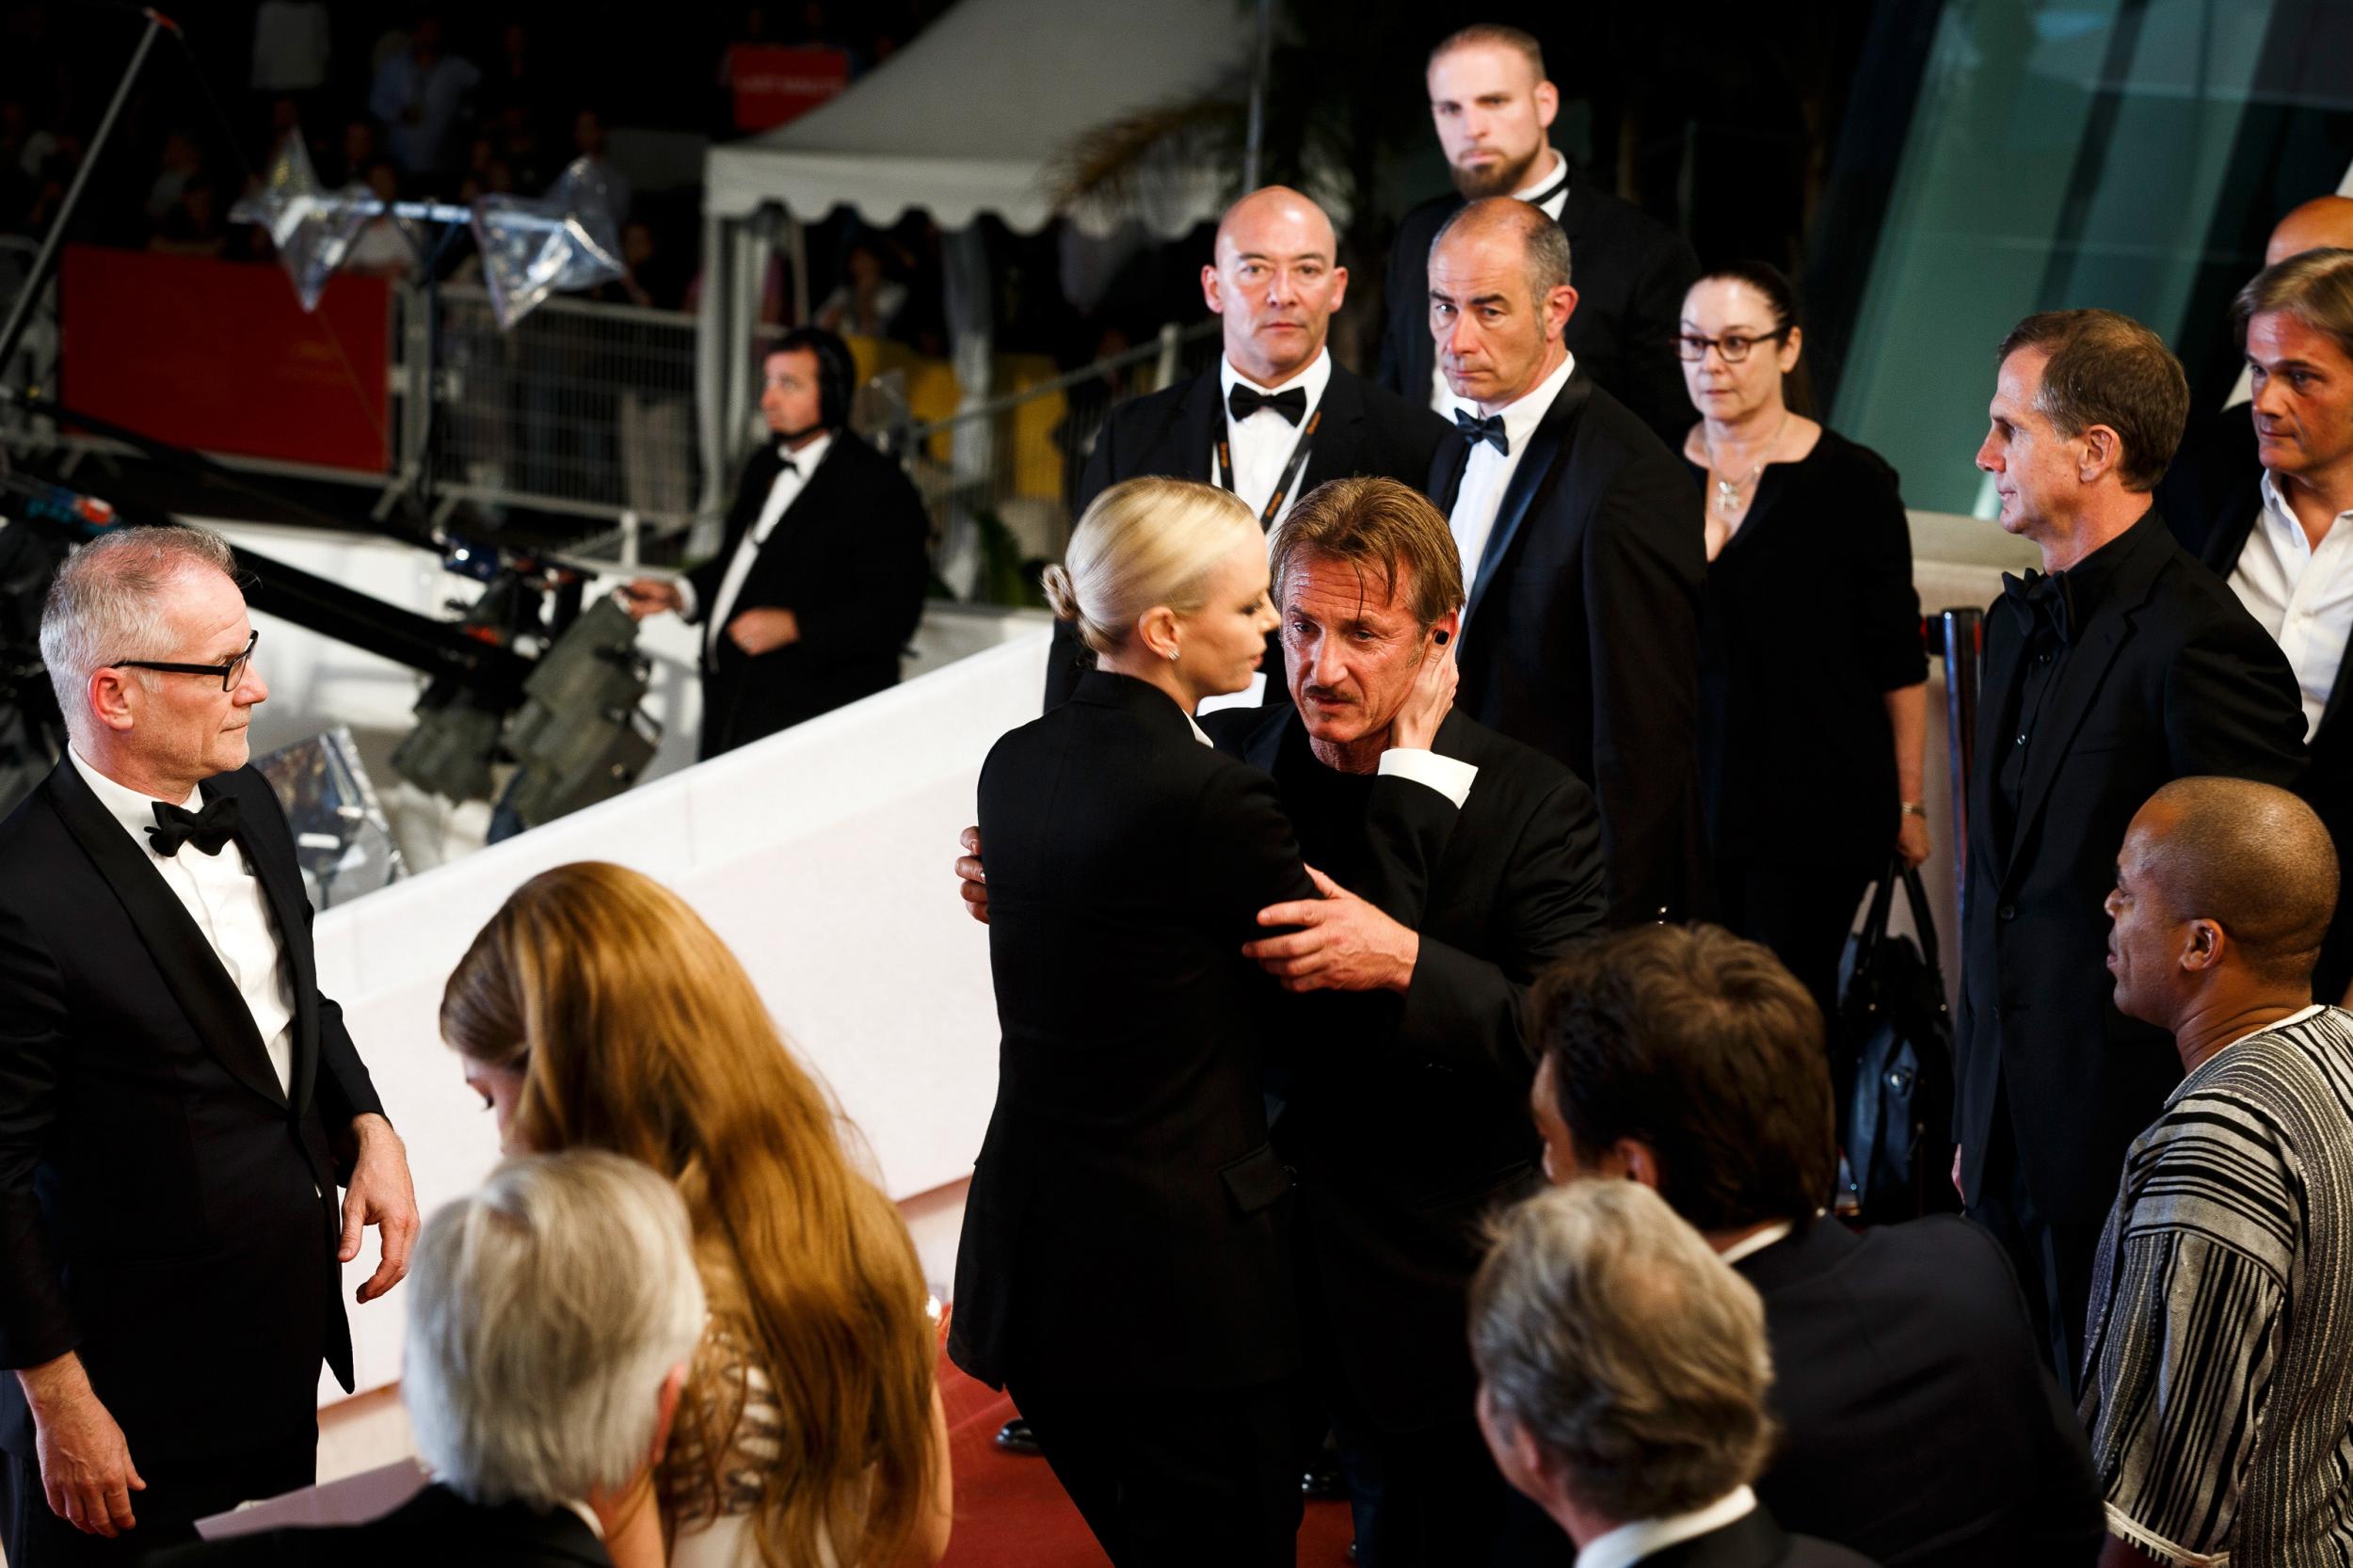 Sean Penn and Charlize Theron embrace at Cannes